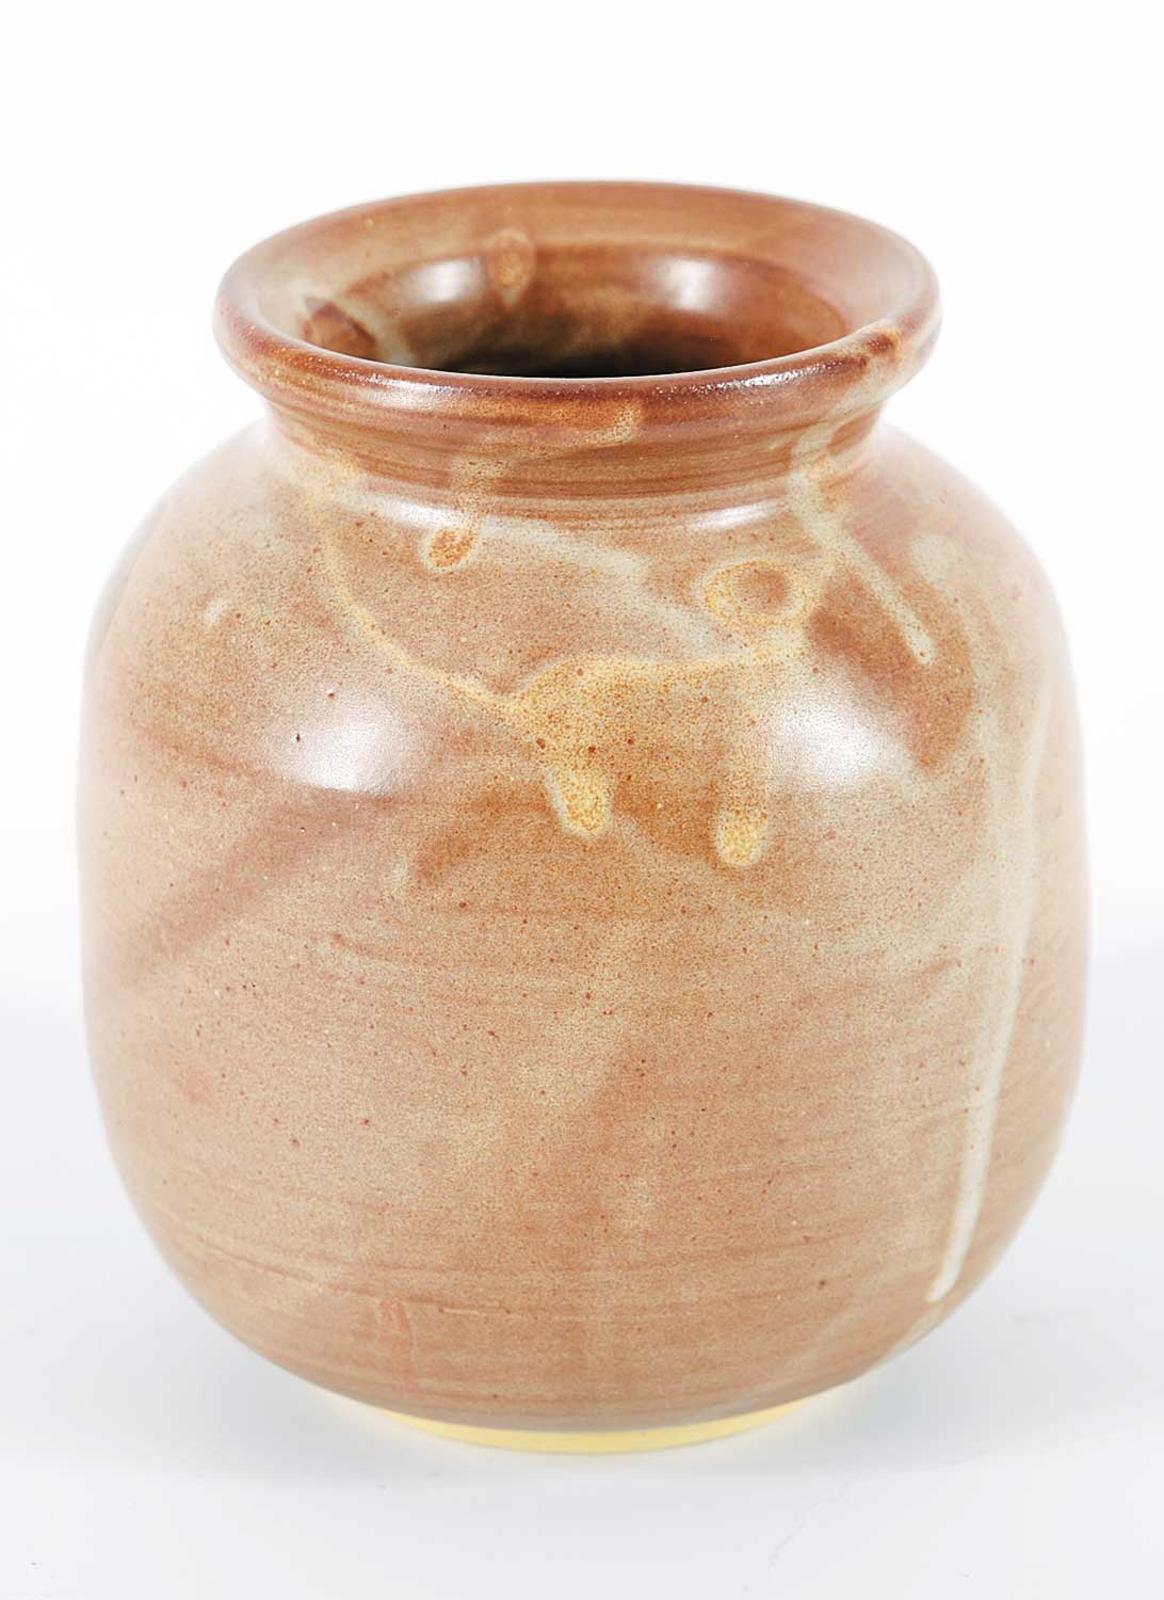 Joanne Kohl - Untitled - Lightly Decorated Brown Pot